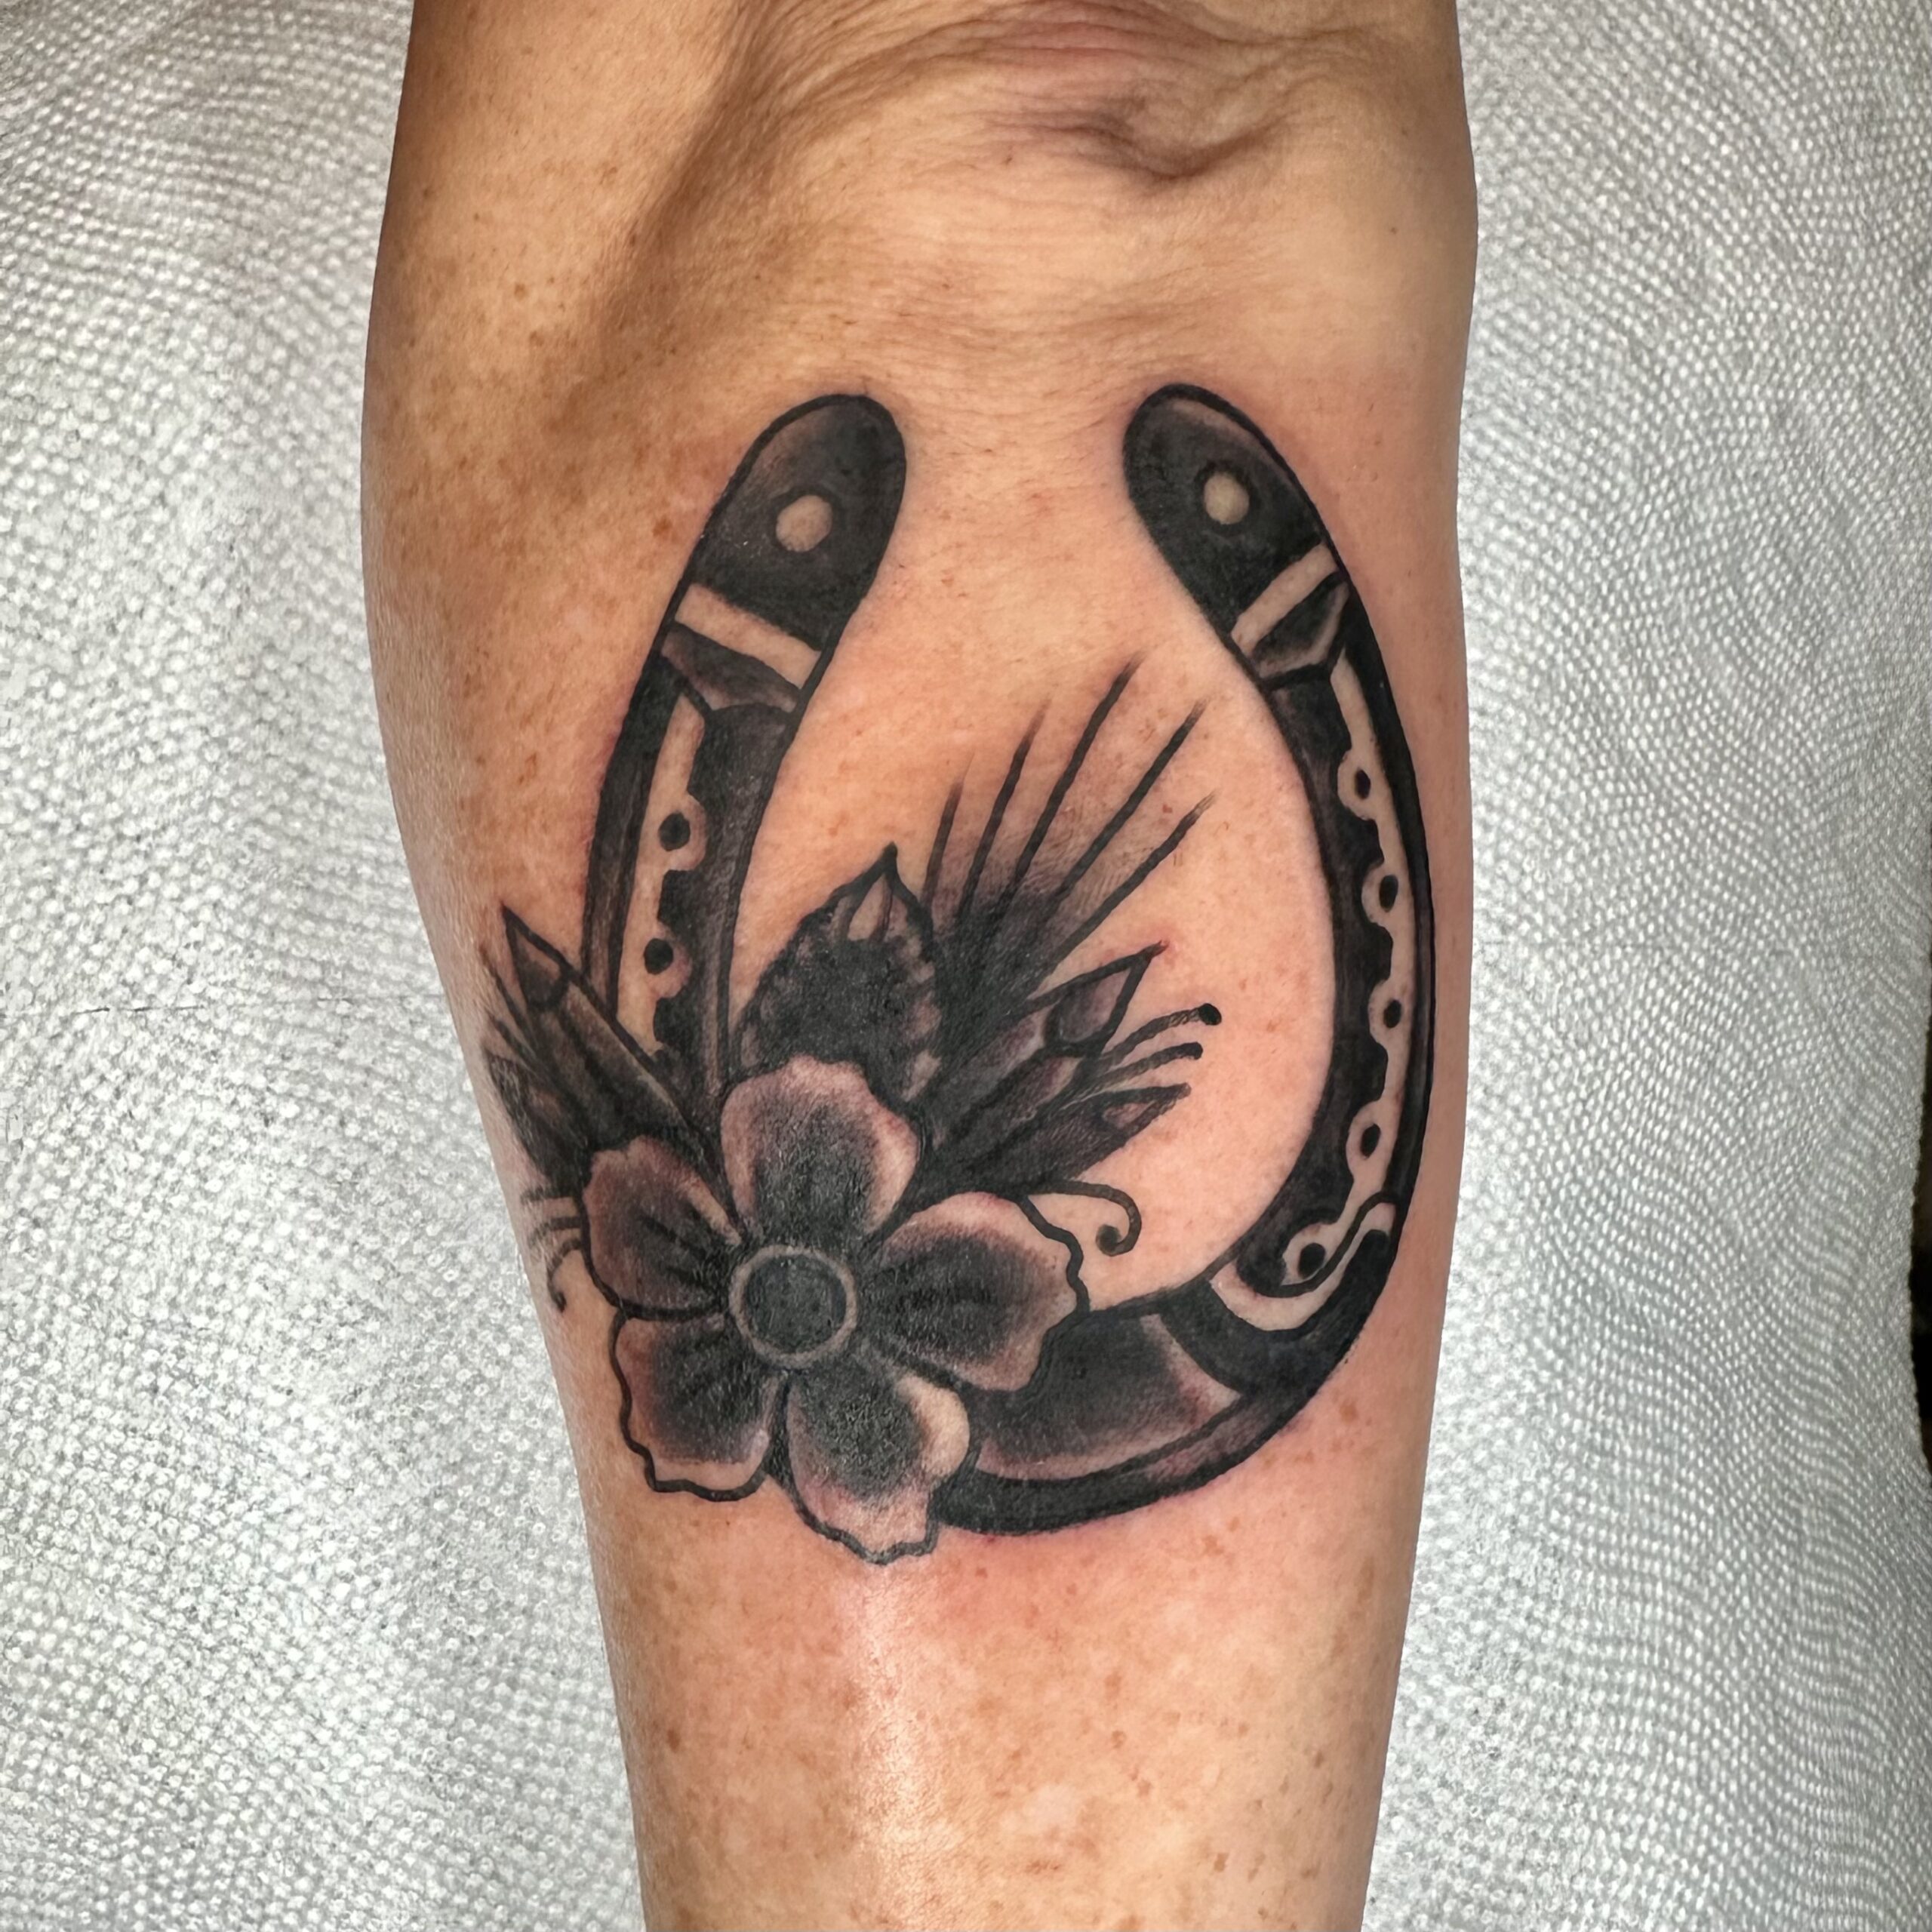 tattoo of a horseshoe with a flower on it